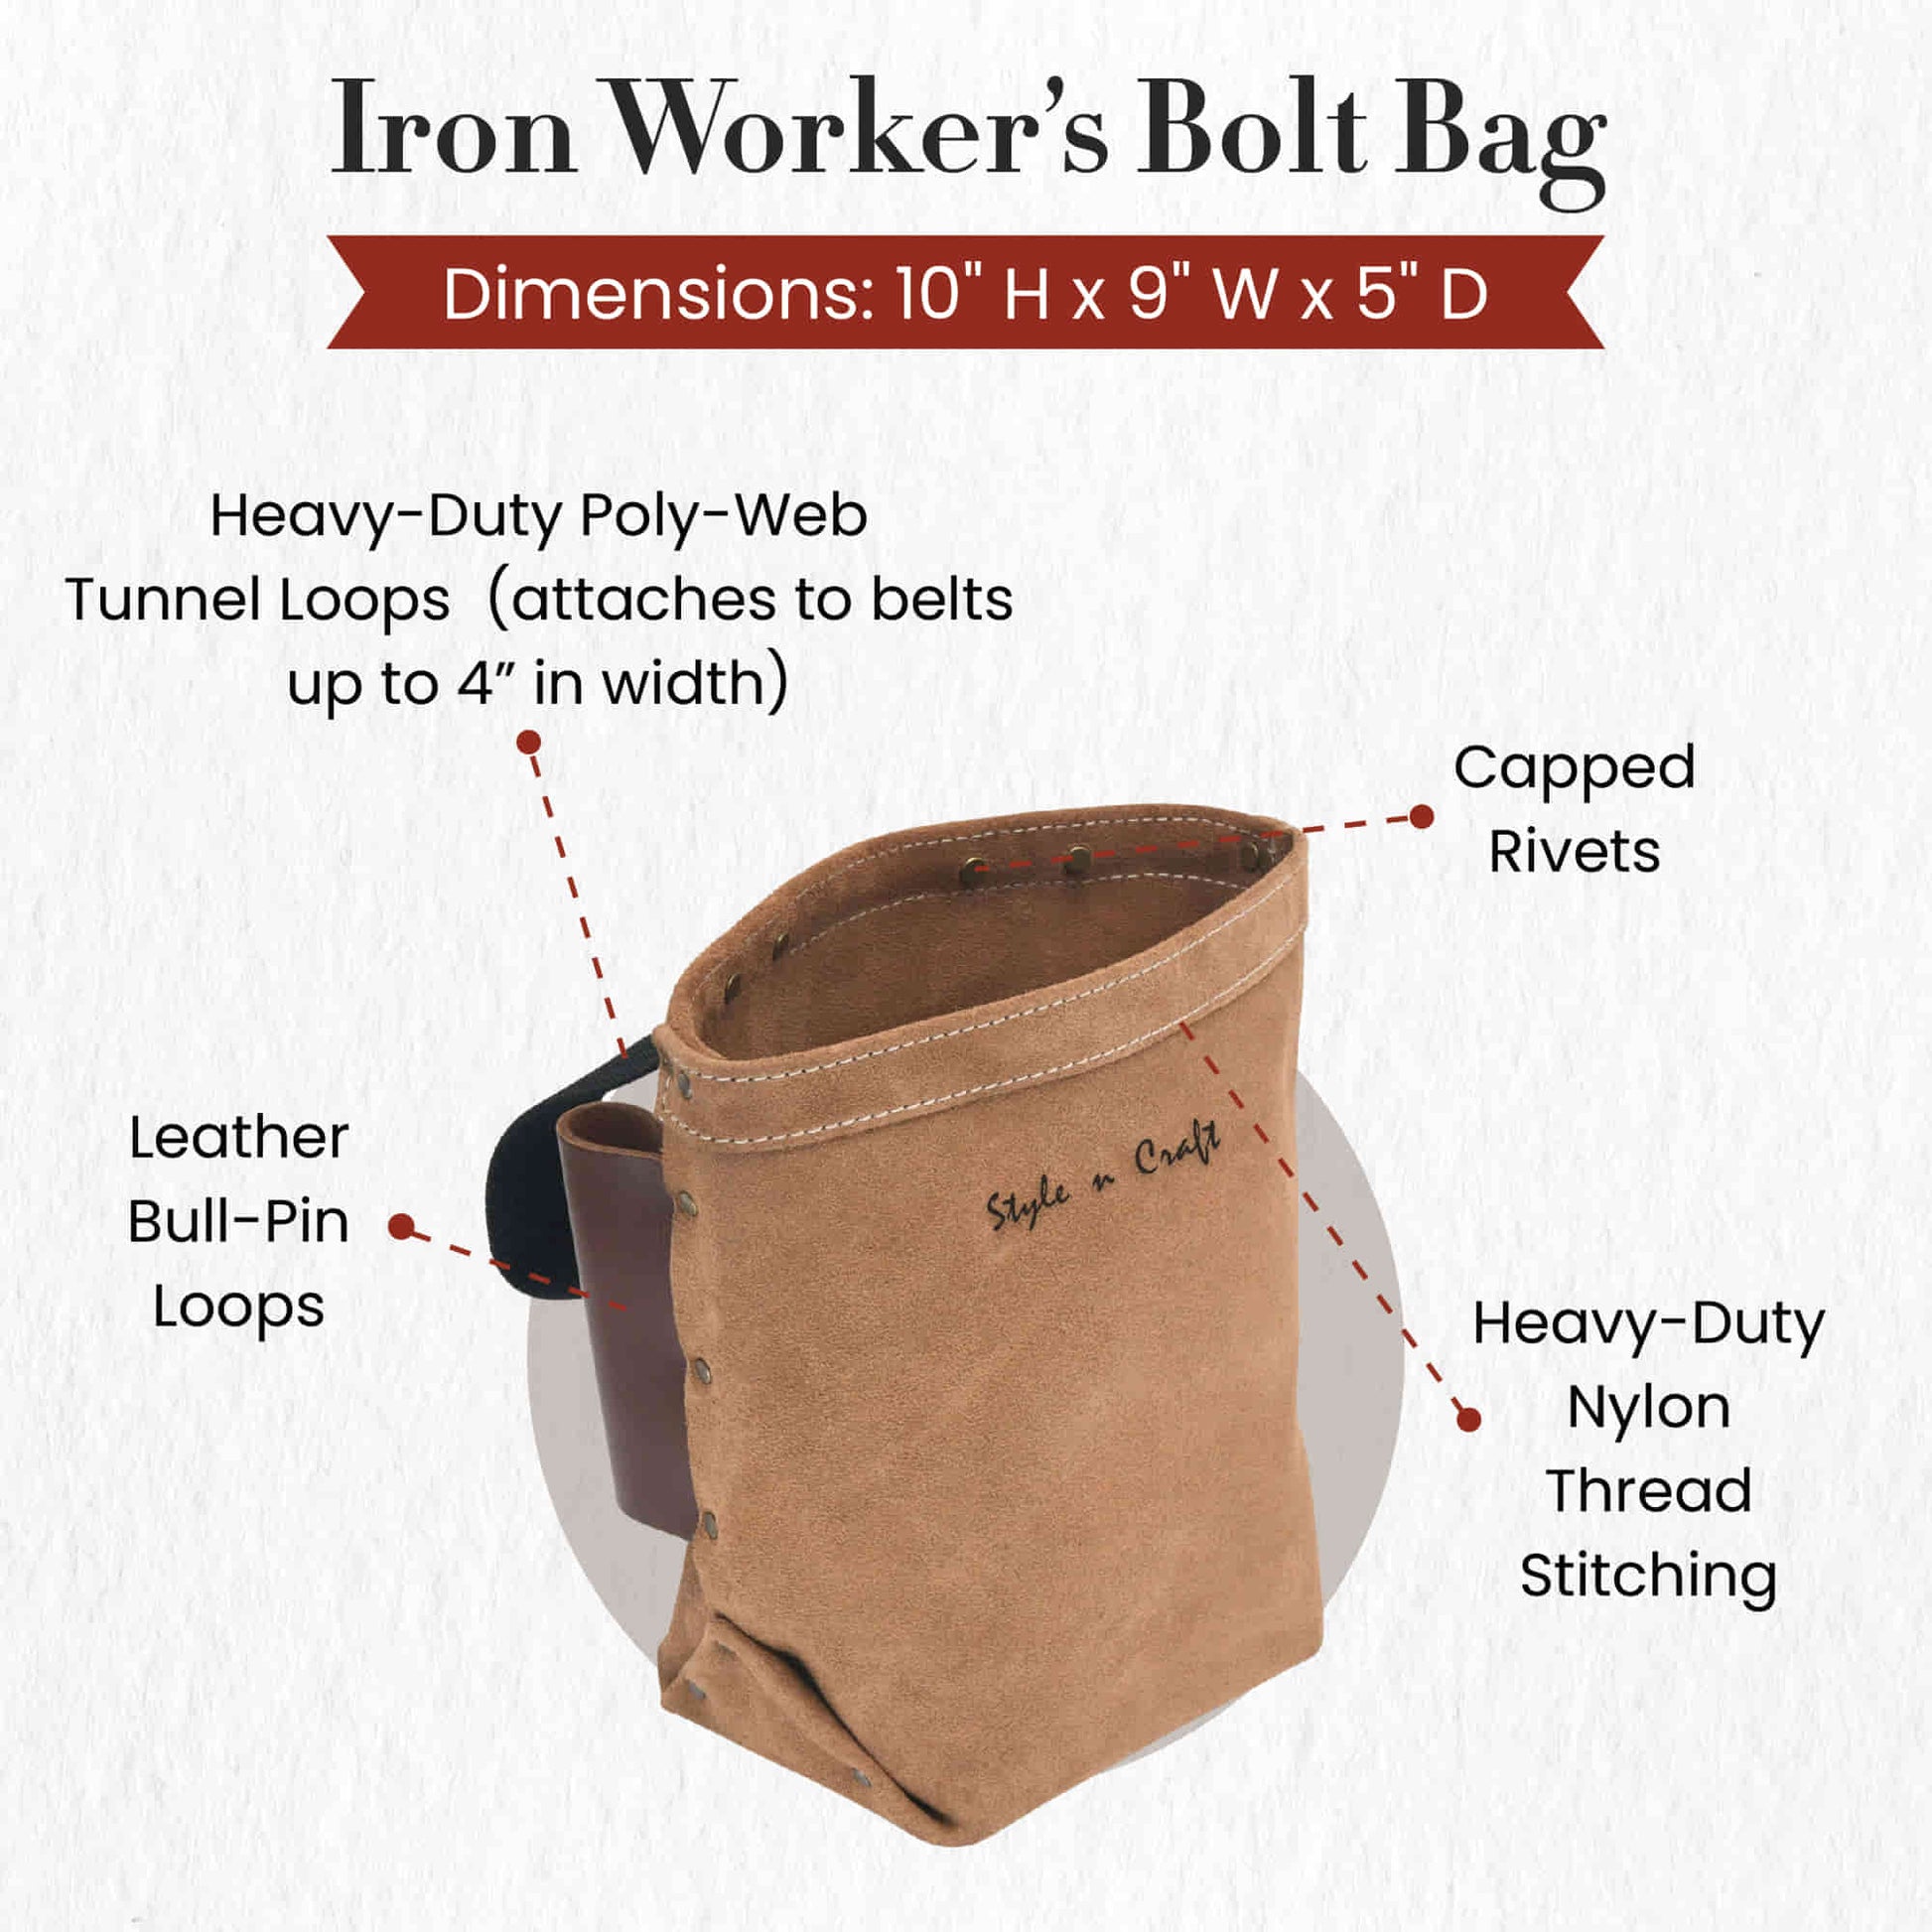 Style n Craft 88515 - Iron Worker's Bolt Bag in Heavy Duty Suede Leather in Dark Tan Color with Double Bull Pin Full Grain Leather Loops - Front Angled View Showing the Details